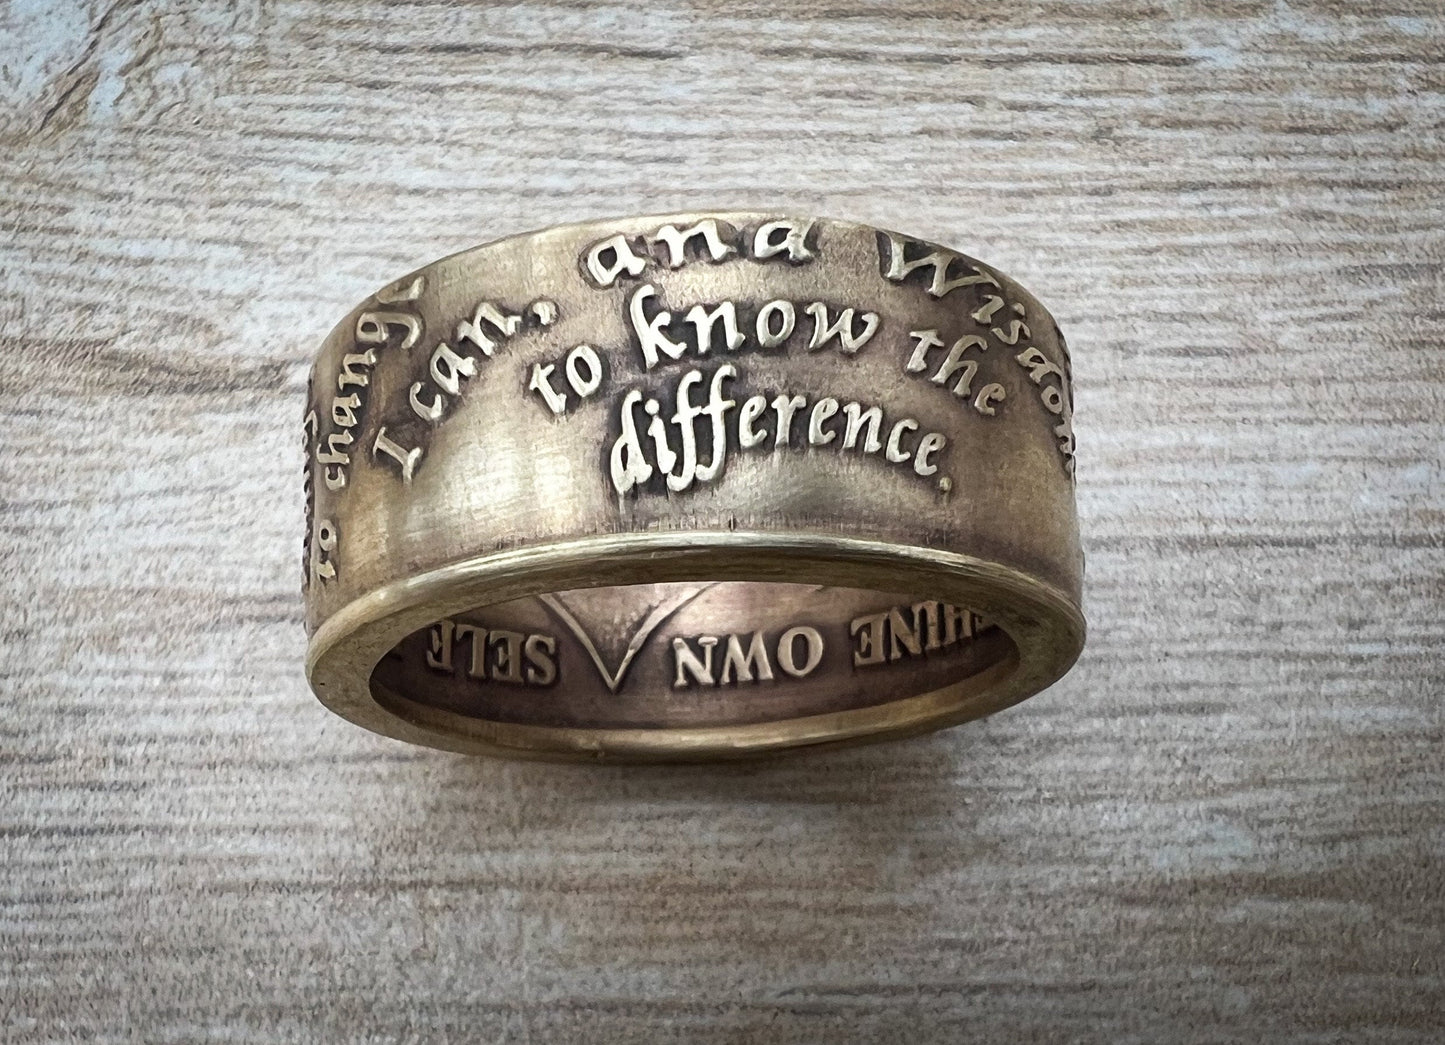 Serenity Prayer AA Ring, Sobriety, AA anniversary, Alcoholics Anonymous, Coin Ring, AA Coin, Coin Rings, Recovery Gift 5-14